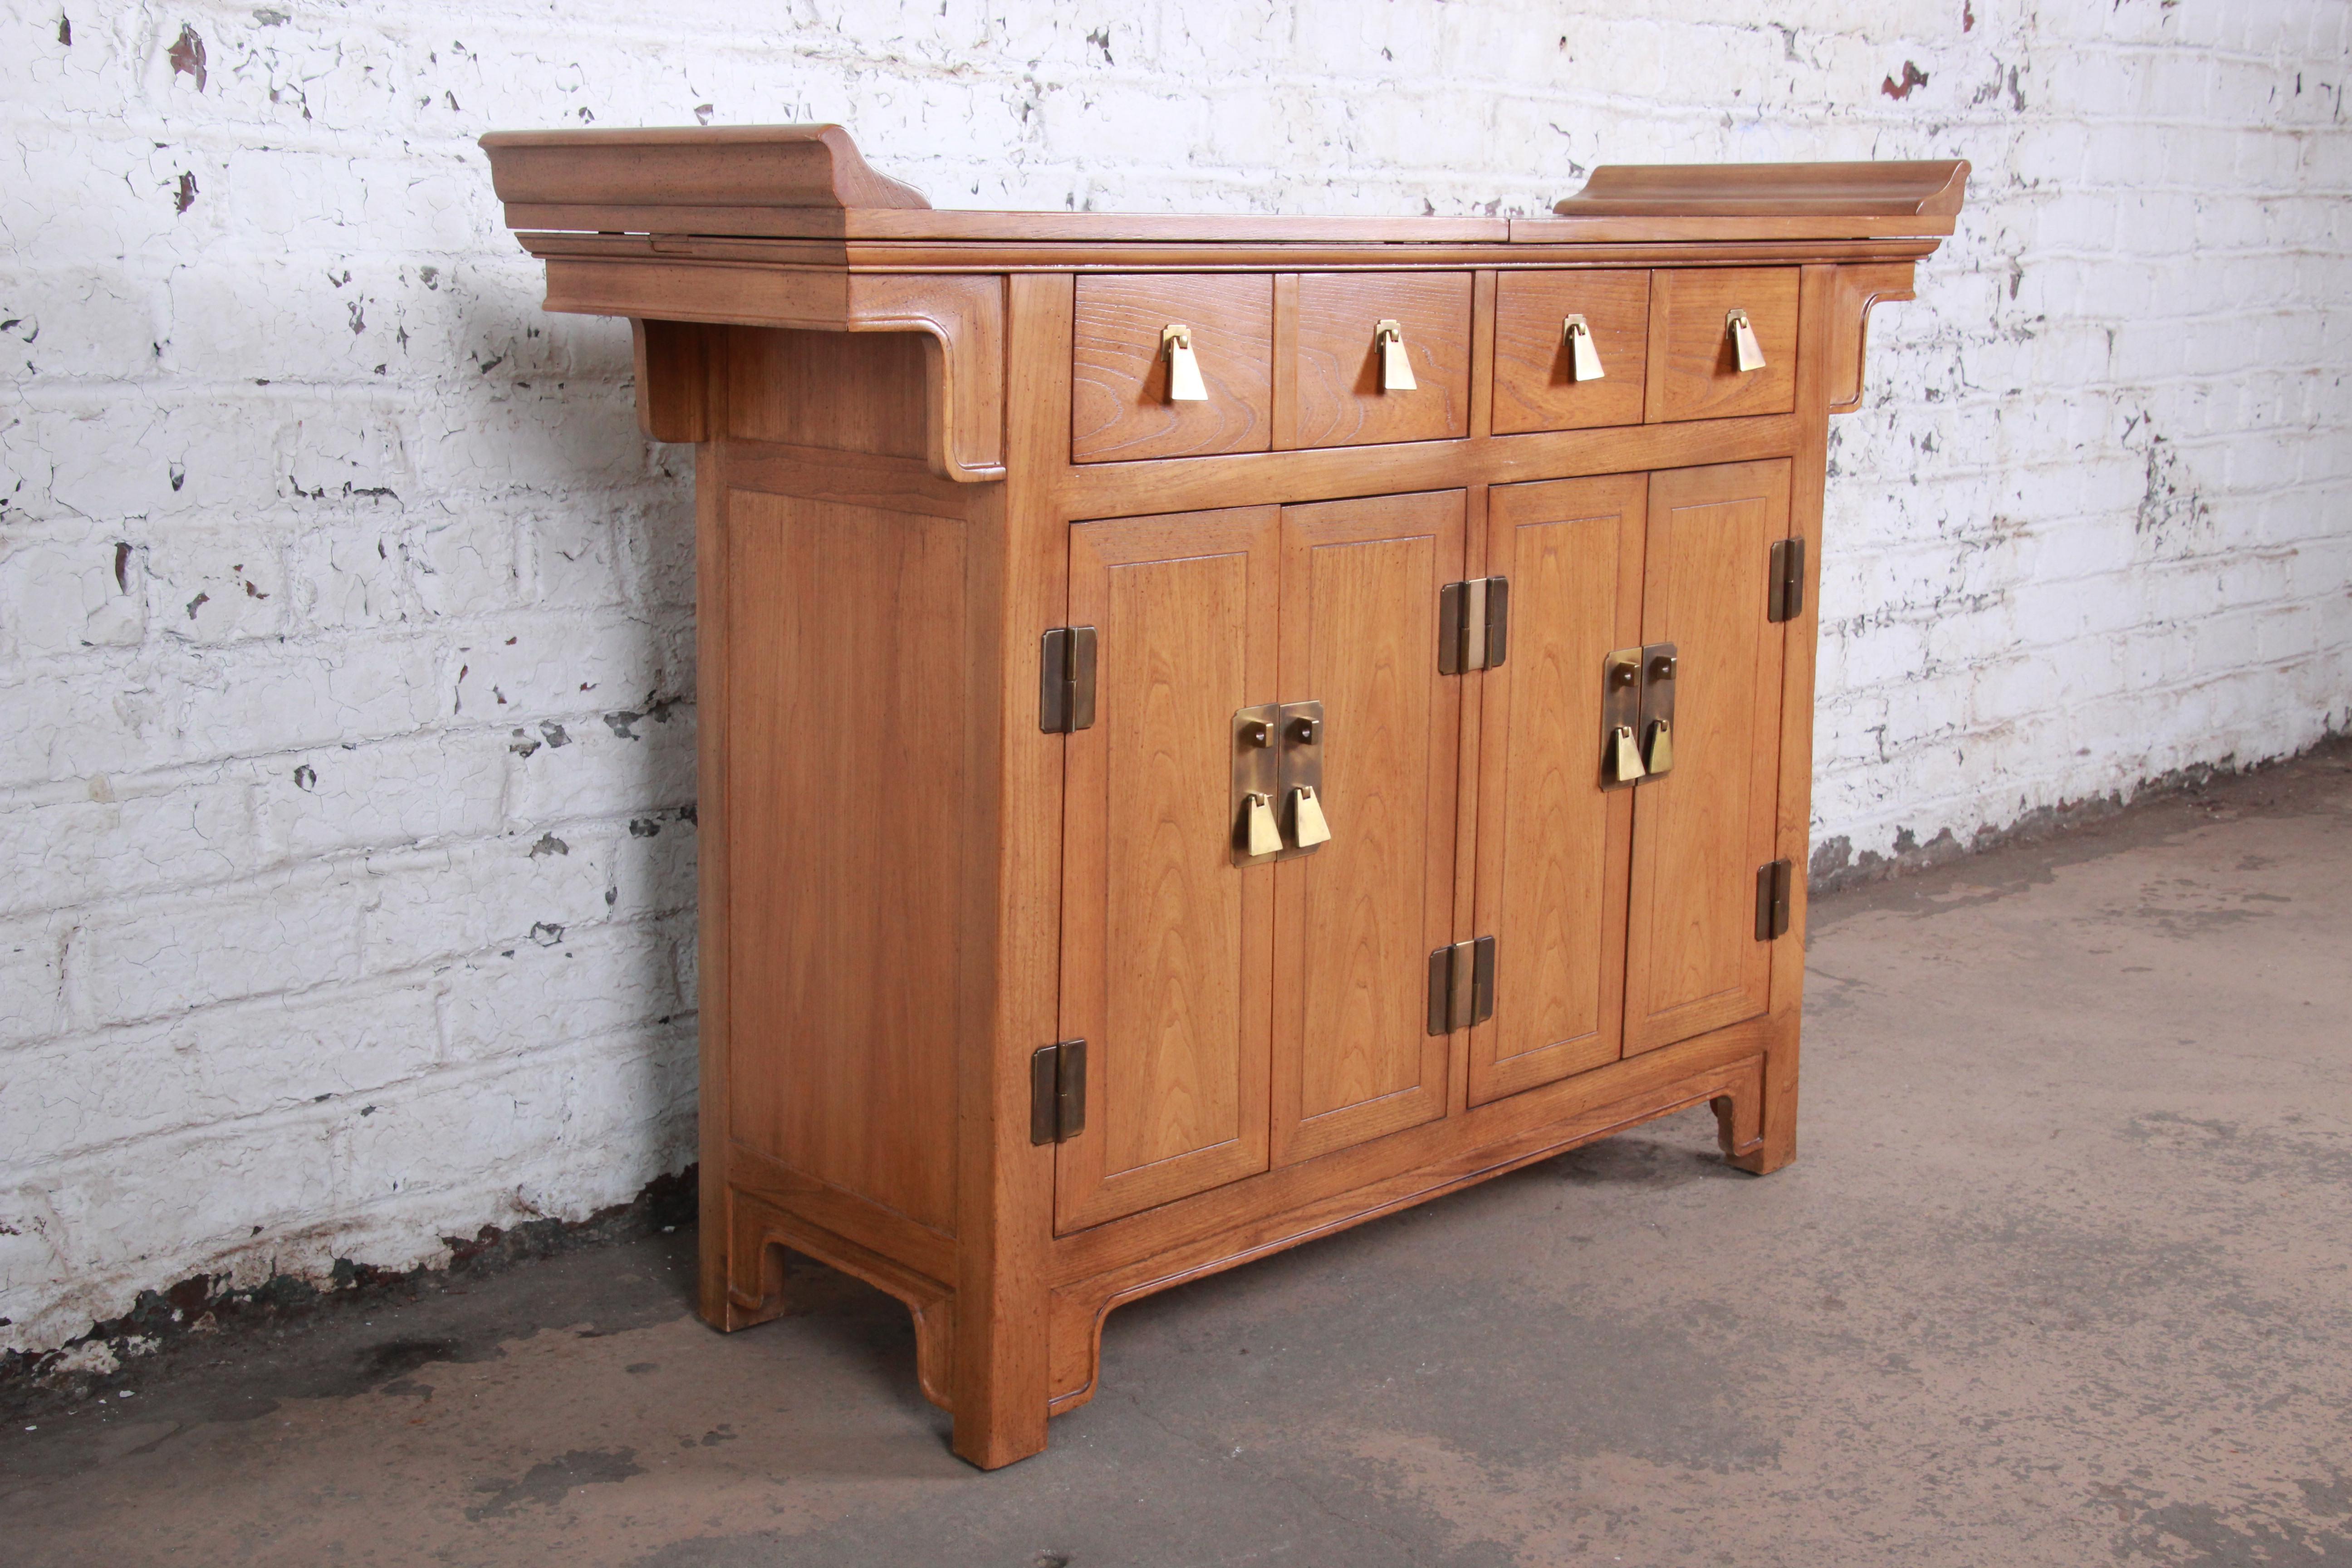 A gorgeous mid-century Hollywood Regency chinoiserie buffet server or bar cabinet by Michael Taylor for Baker furniture. The server features beautiful wood grain with solid elm wood construction and a nice Asian design. It offers excellent storage,